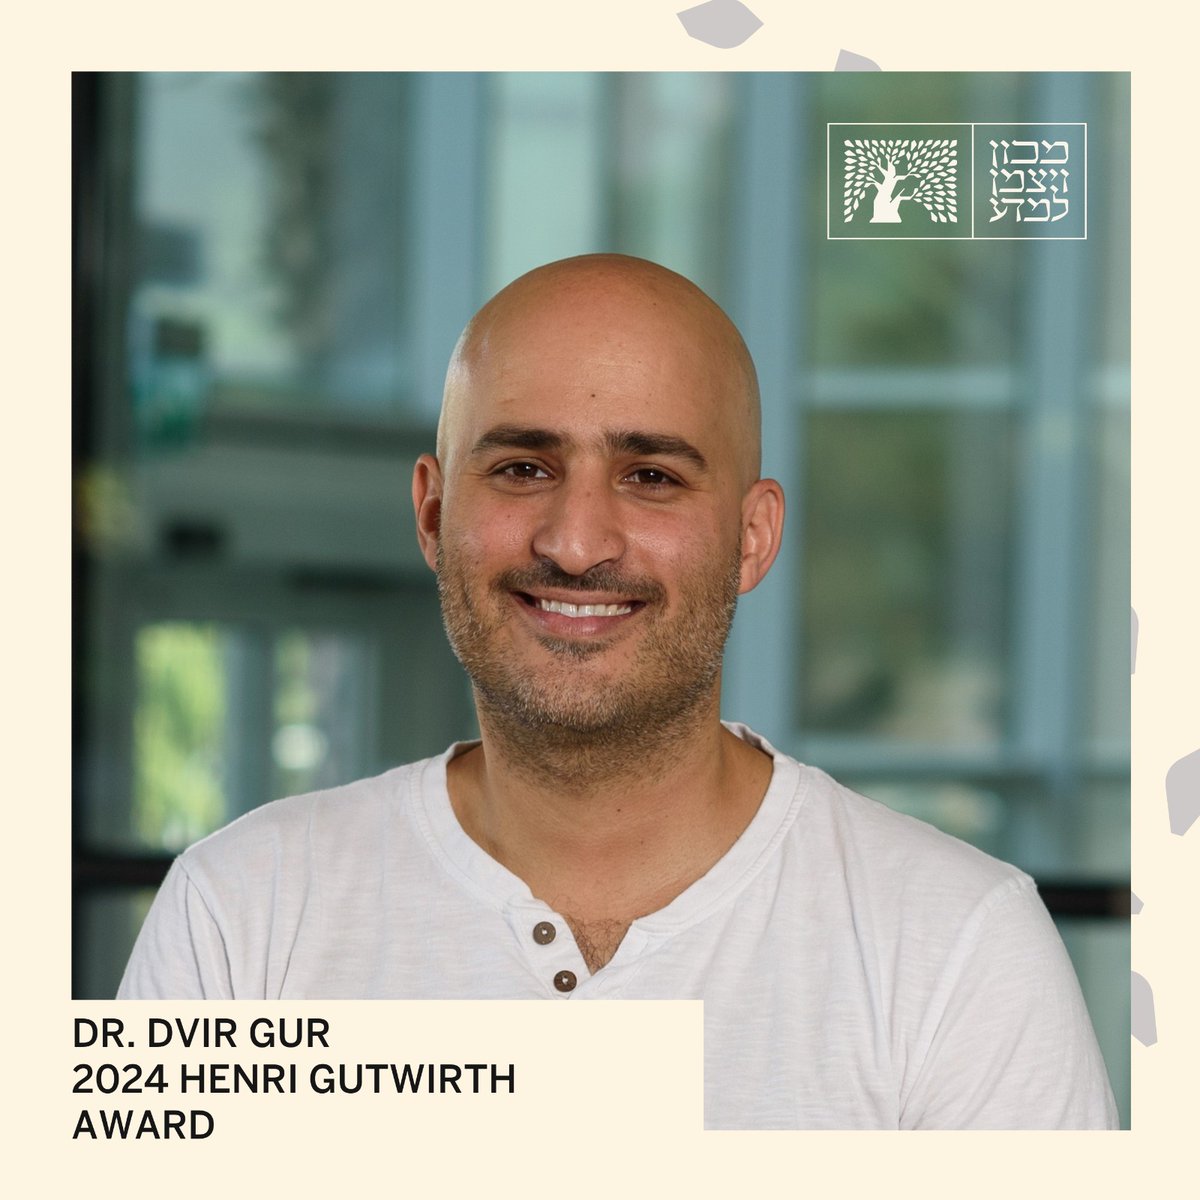 Congratulations to Dr. @DvirGur of the Department of Molecular Genetics upon being granted the 2024 Henri Gutwirth Award @lab_gur